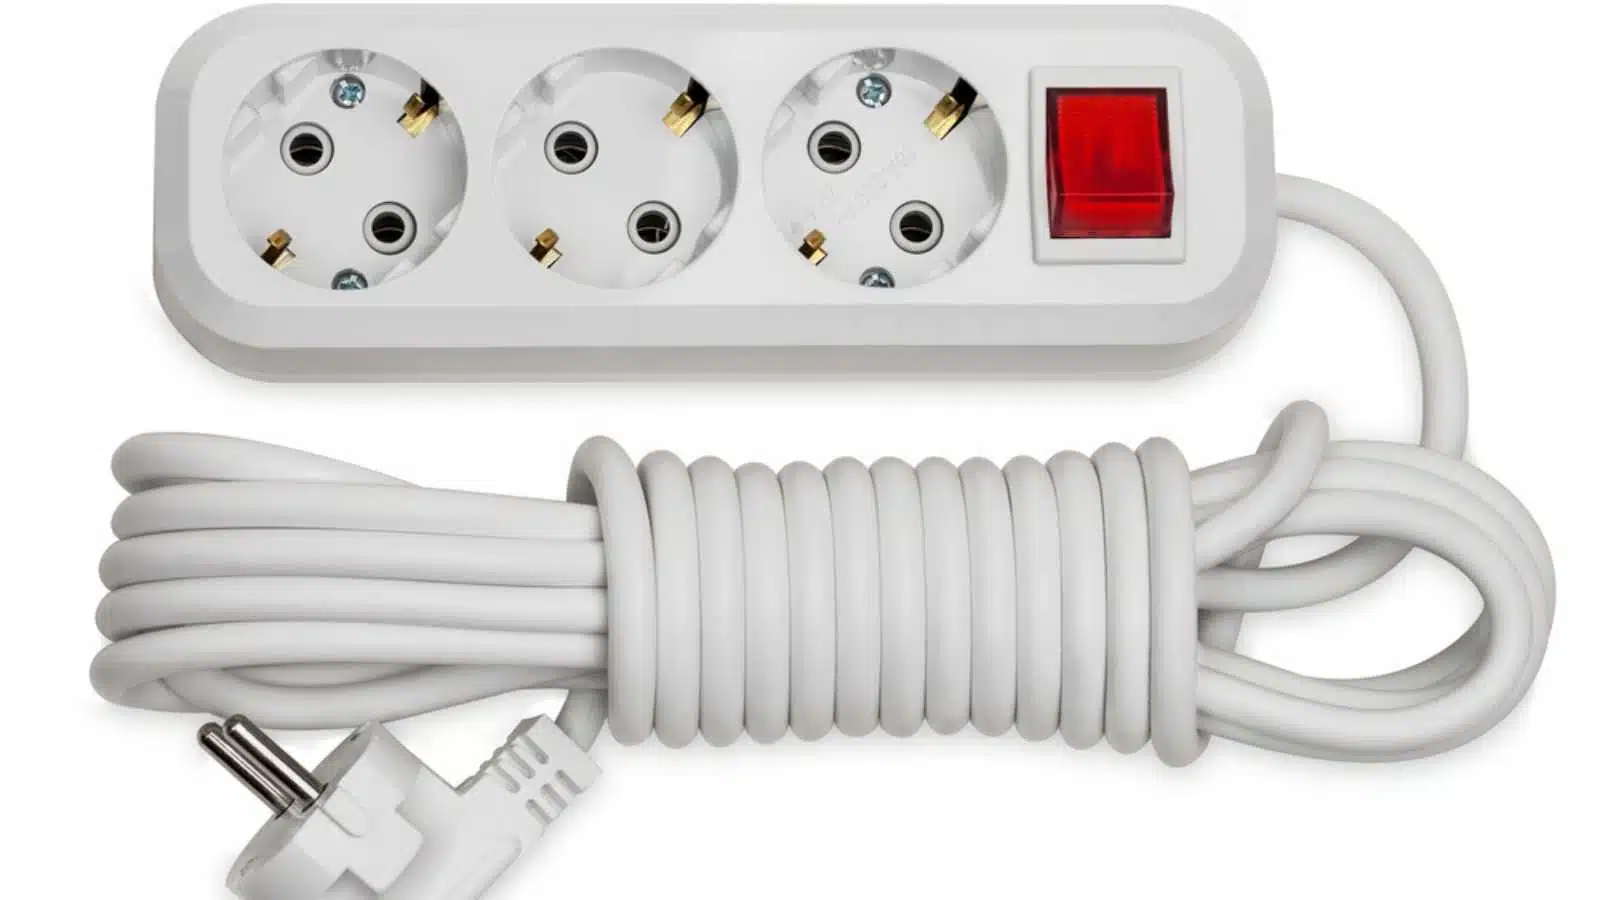 Basic surge protector electric outlet isolated on white background with clipping paths
